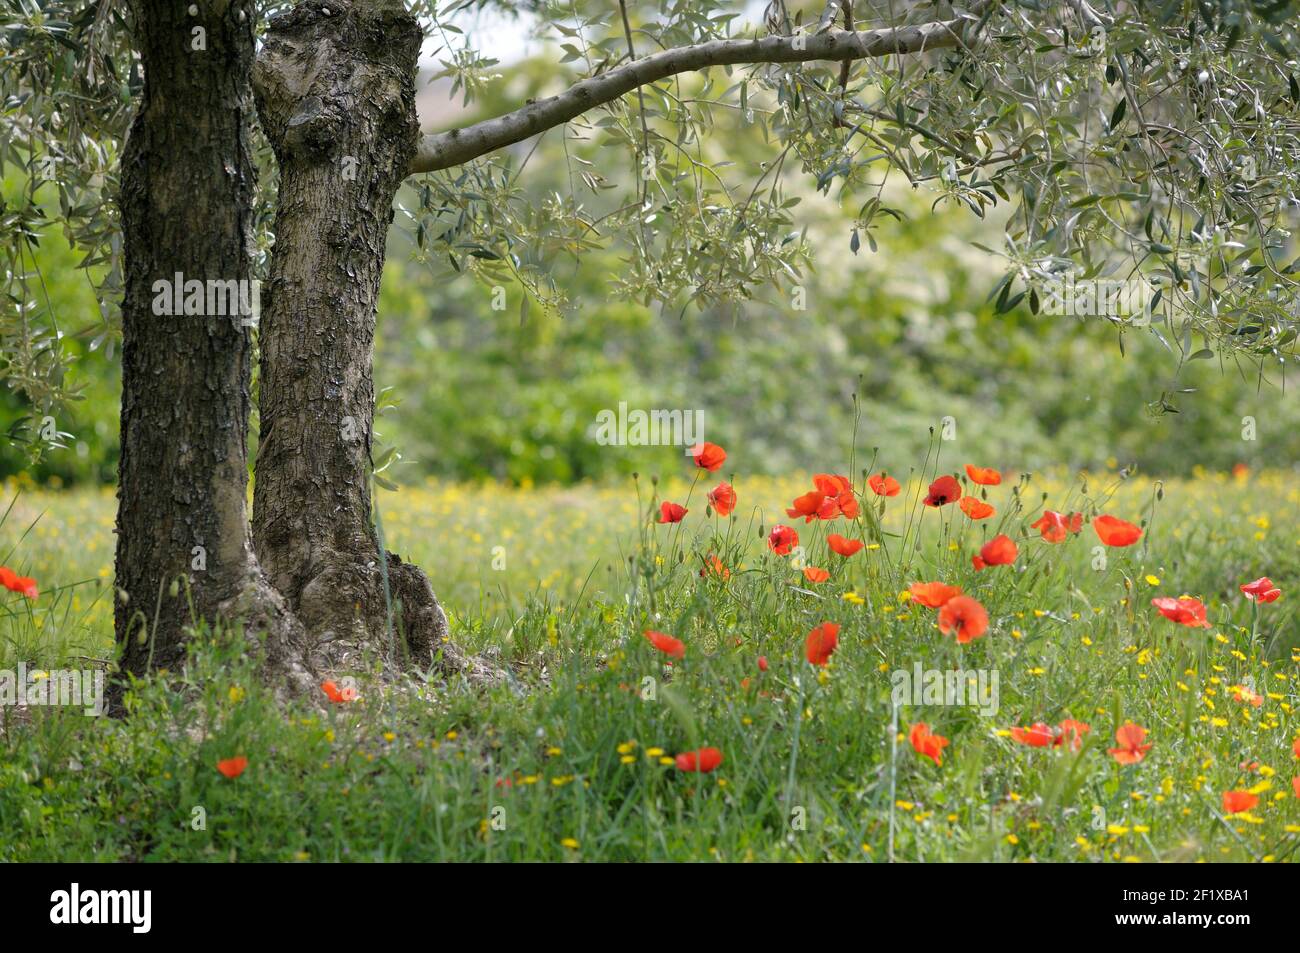 Poppies in a field, Lourmarin, Vaucluse, Provence-Alpes-Côte d'Azur, France Stock Photo